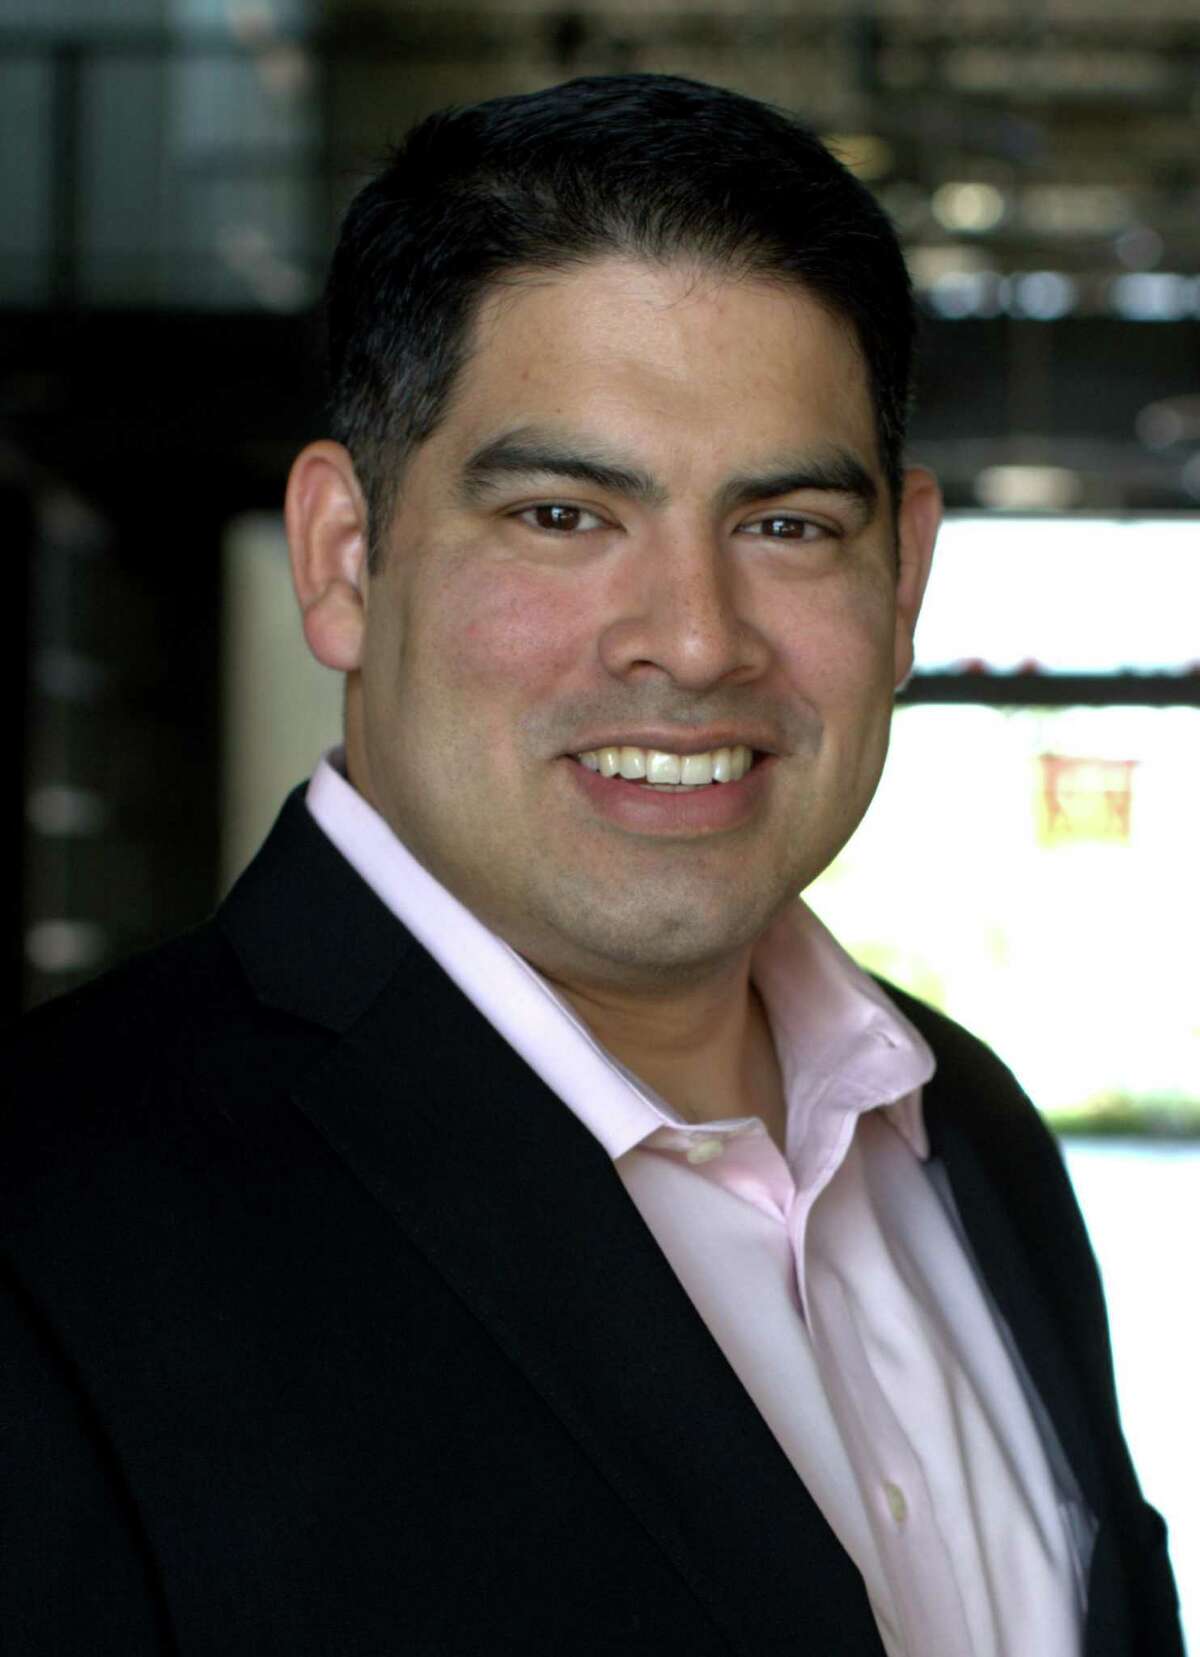 Labor attorney Manny Pelaez is the apparent front-runner for the City Council District 8 slot.